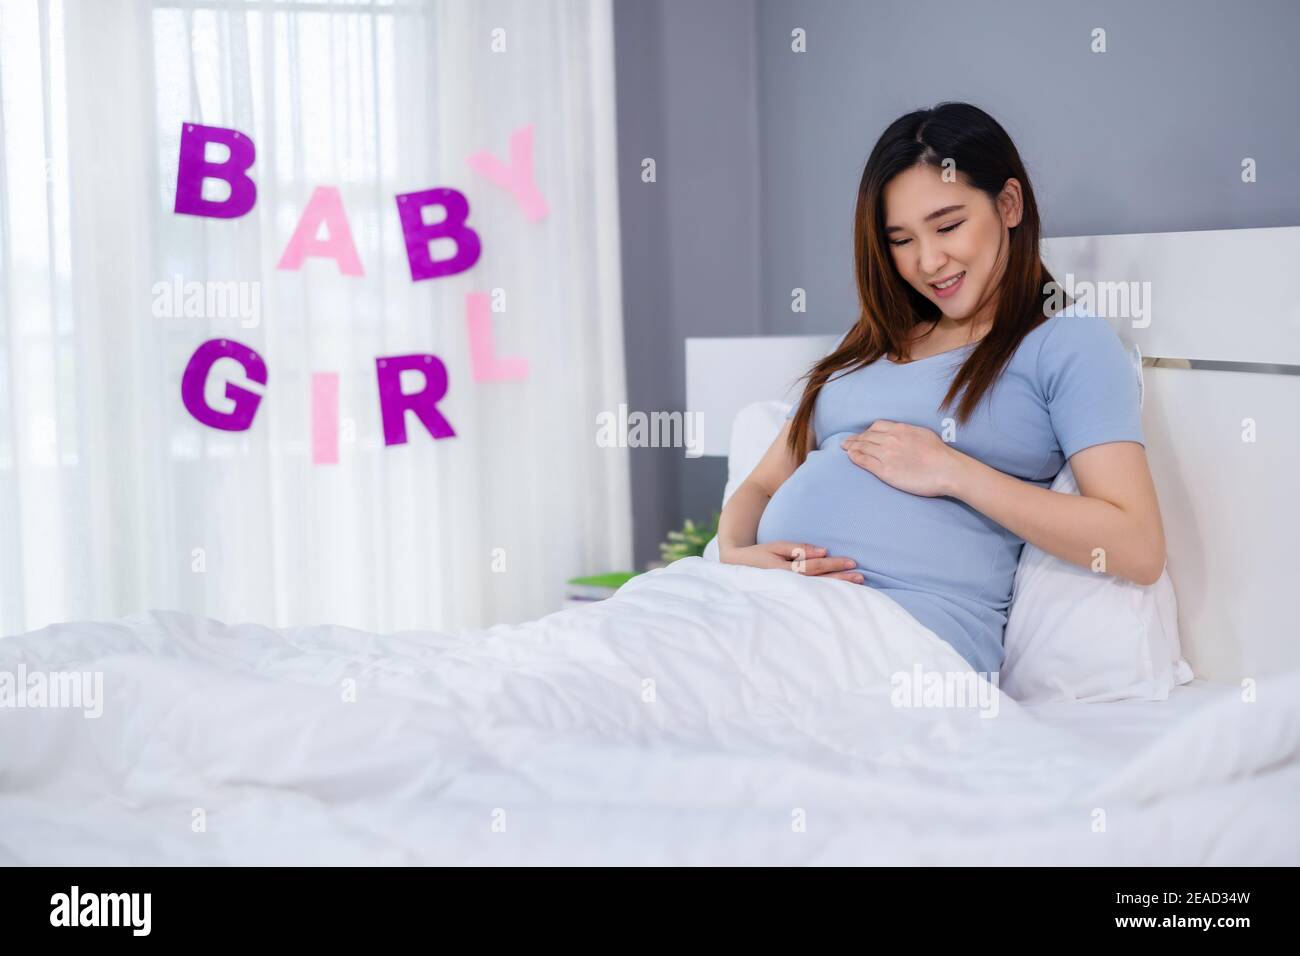 pregnant woman stroking her belly on a bed with baby girl sign Stock Photo